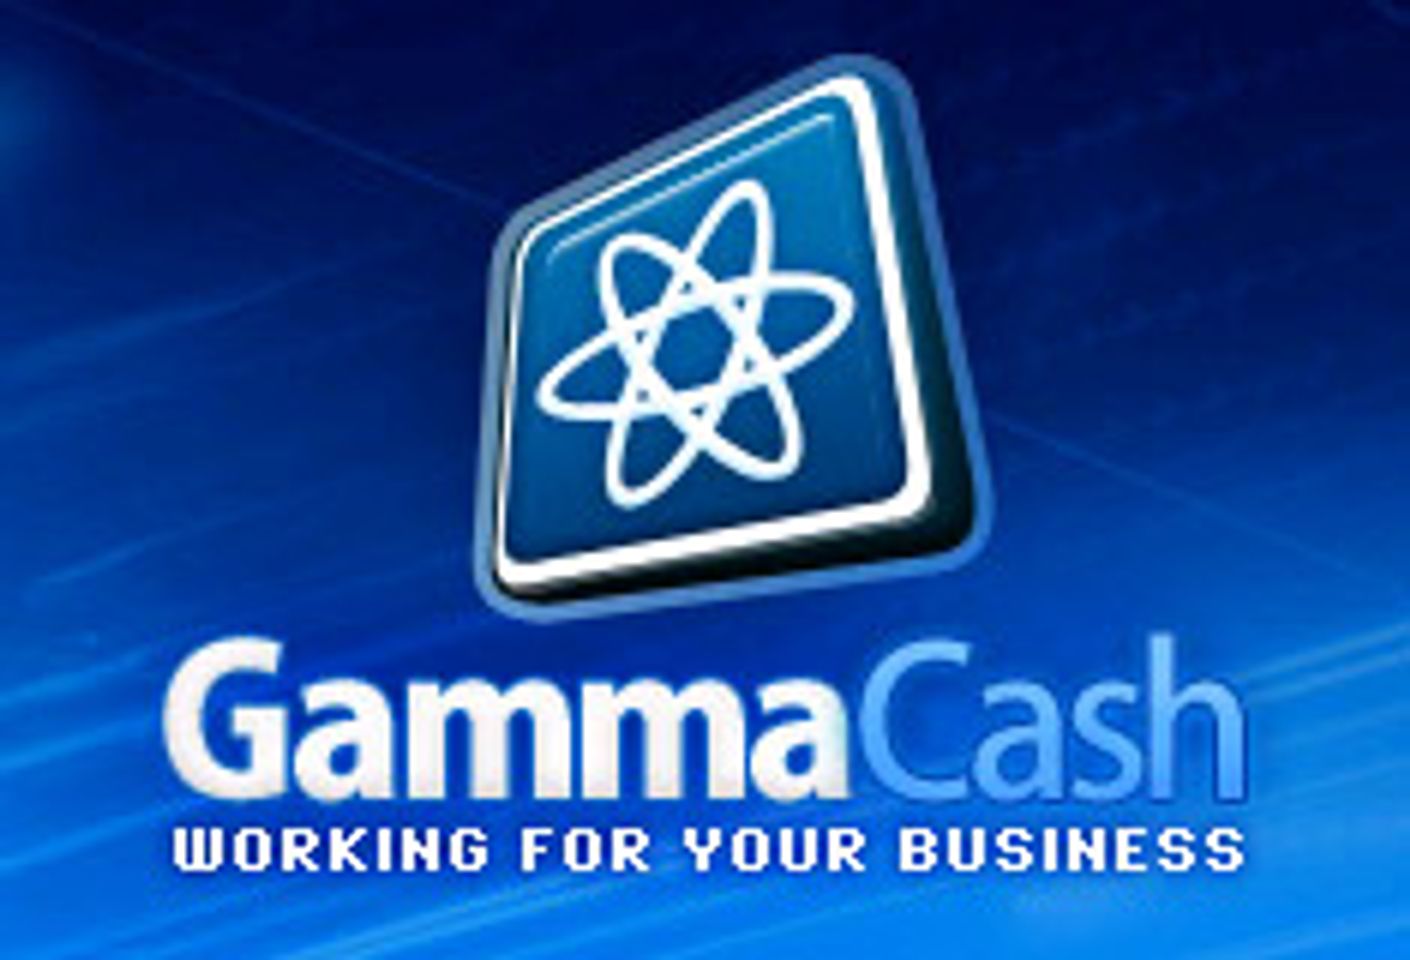 GammaCash: Payouts the Same With or Without Exits